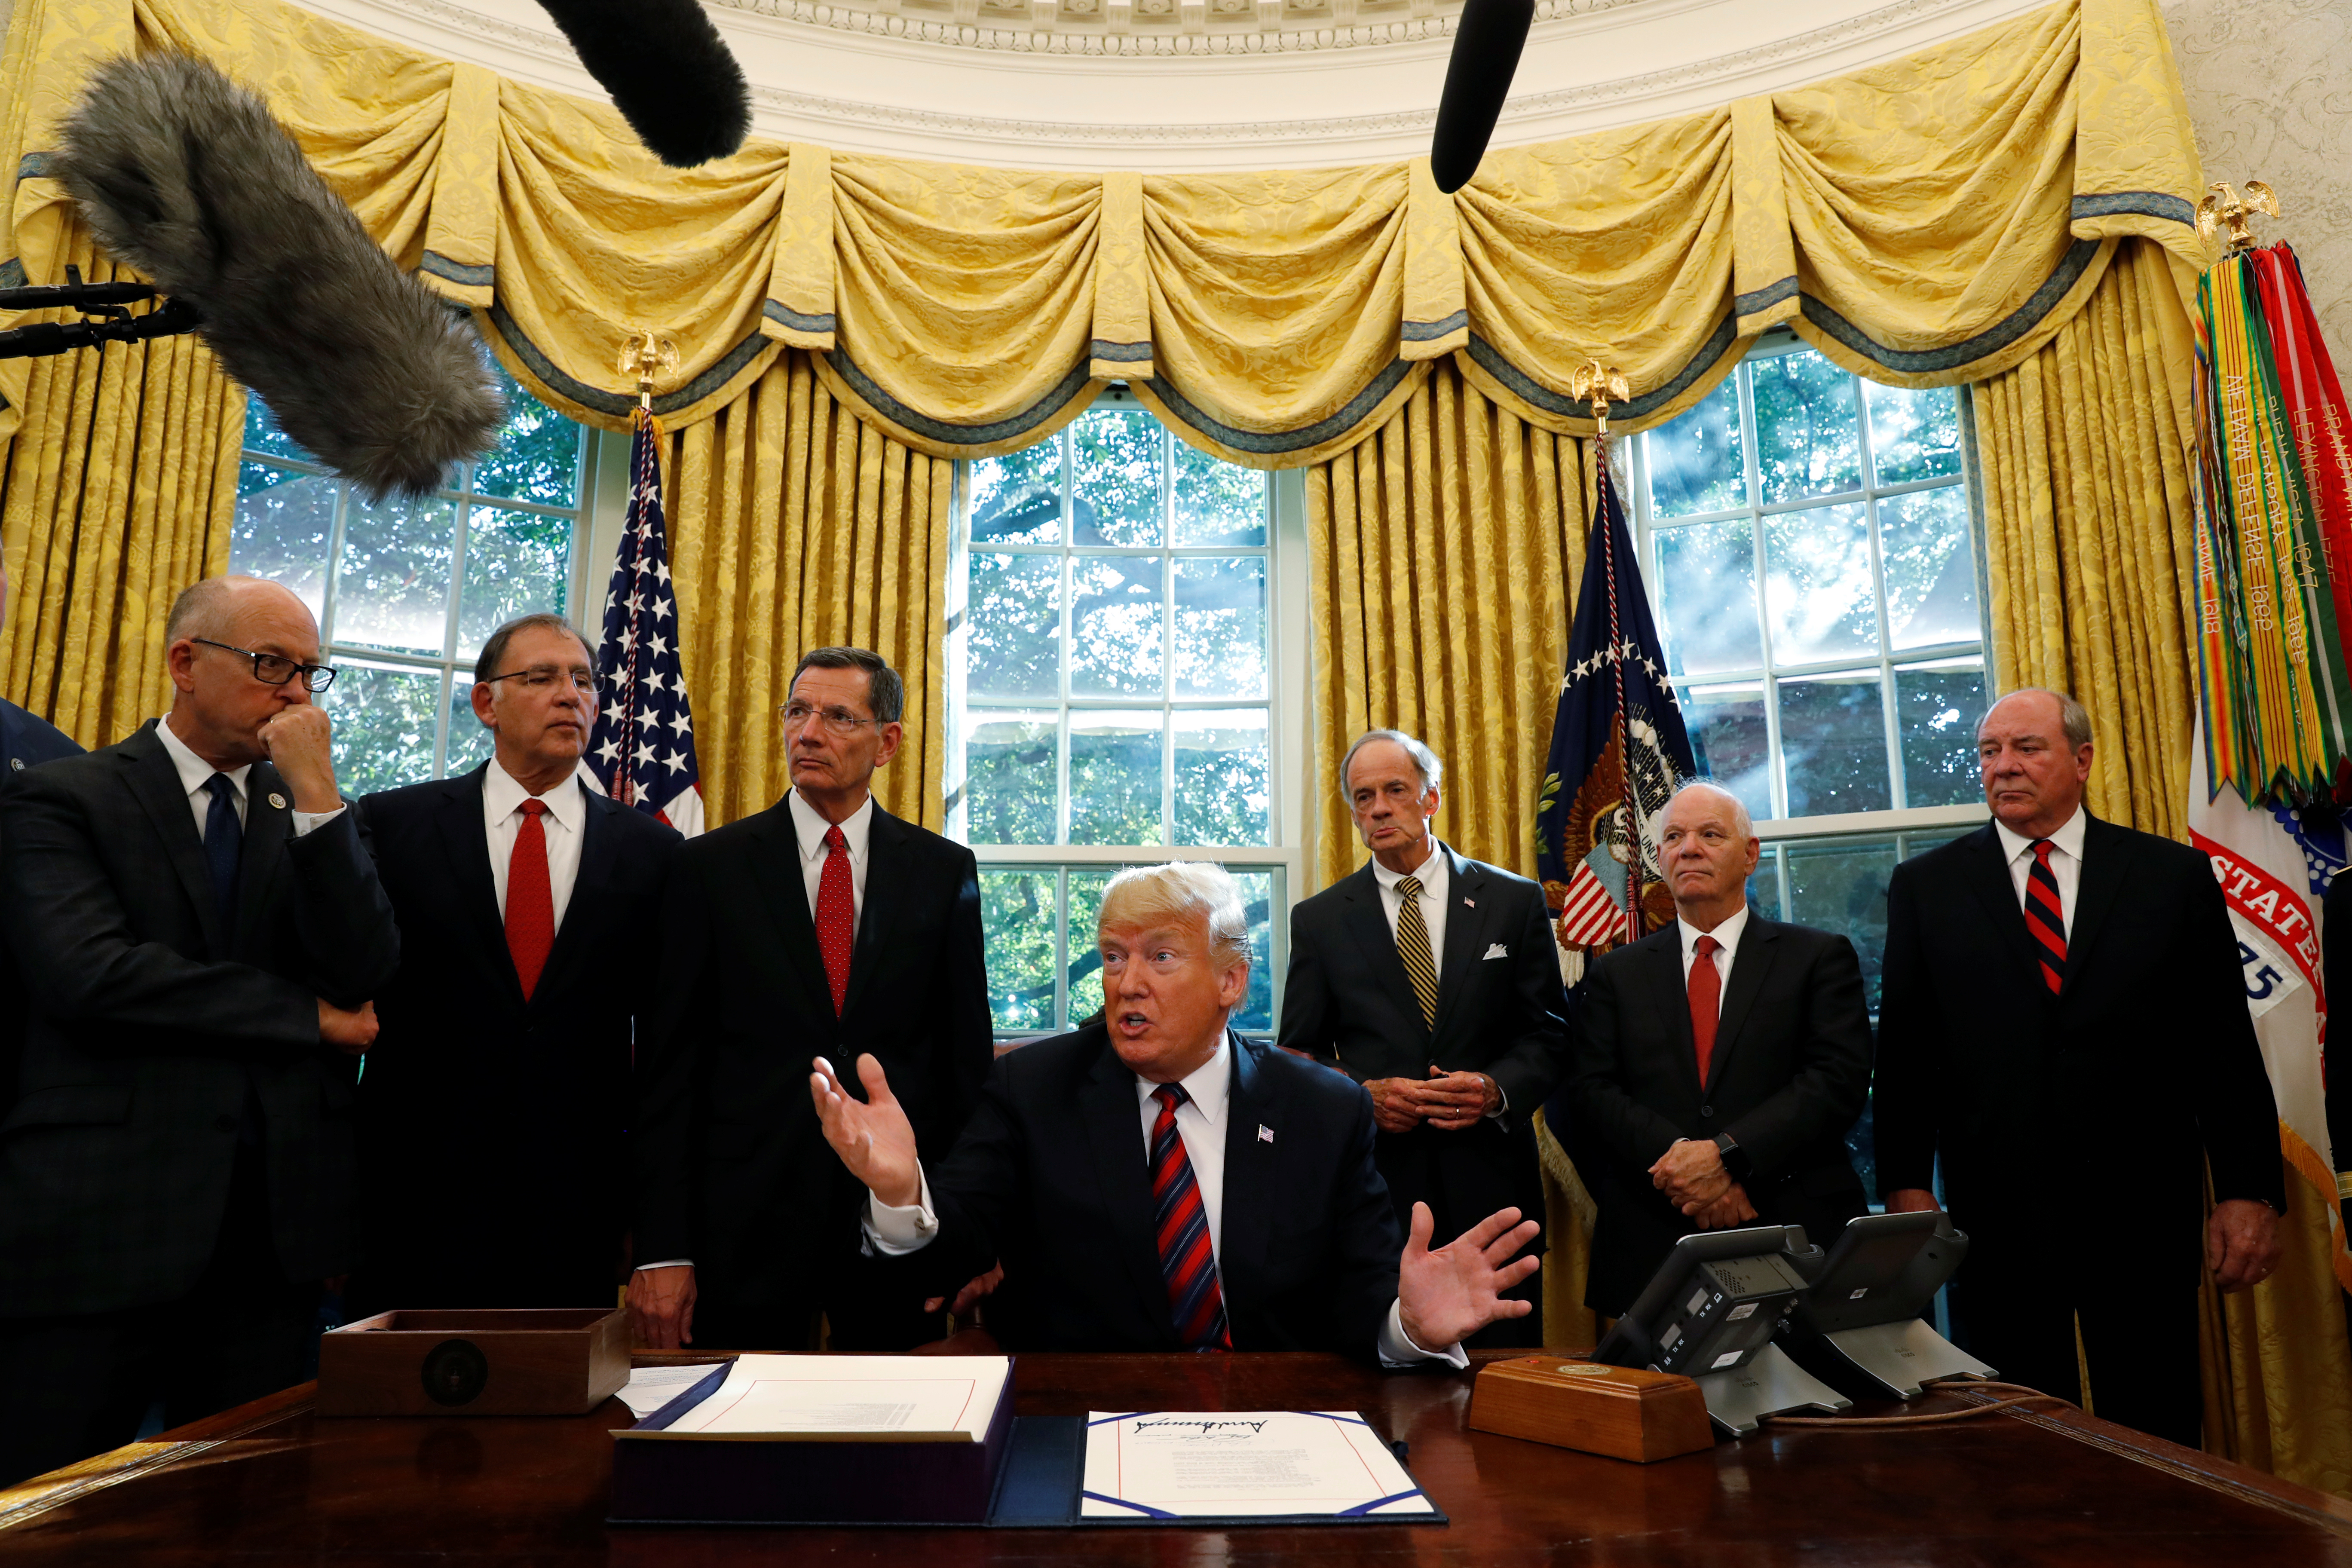 U.S. President Trump talks to reporters during bill signing ceremony at the White House in Washington